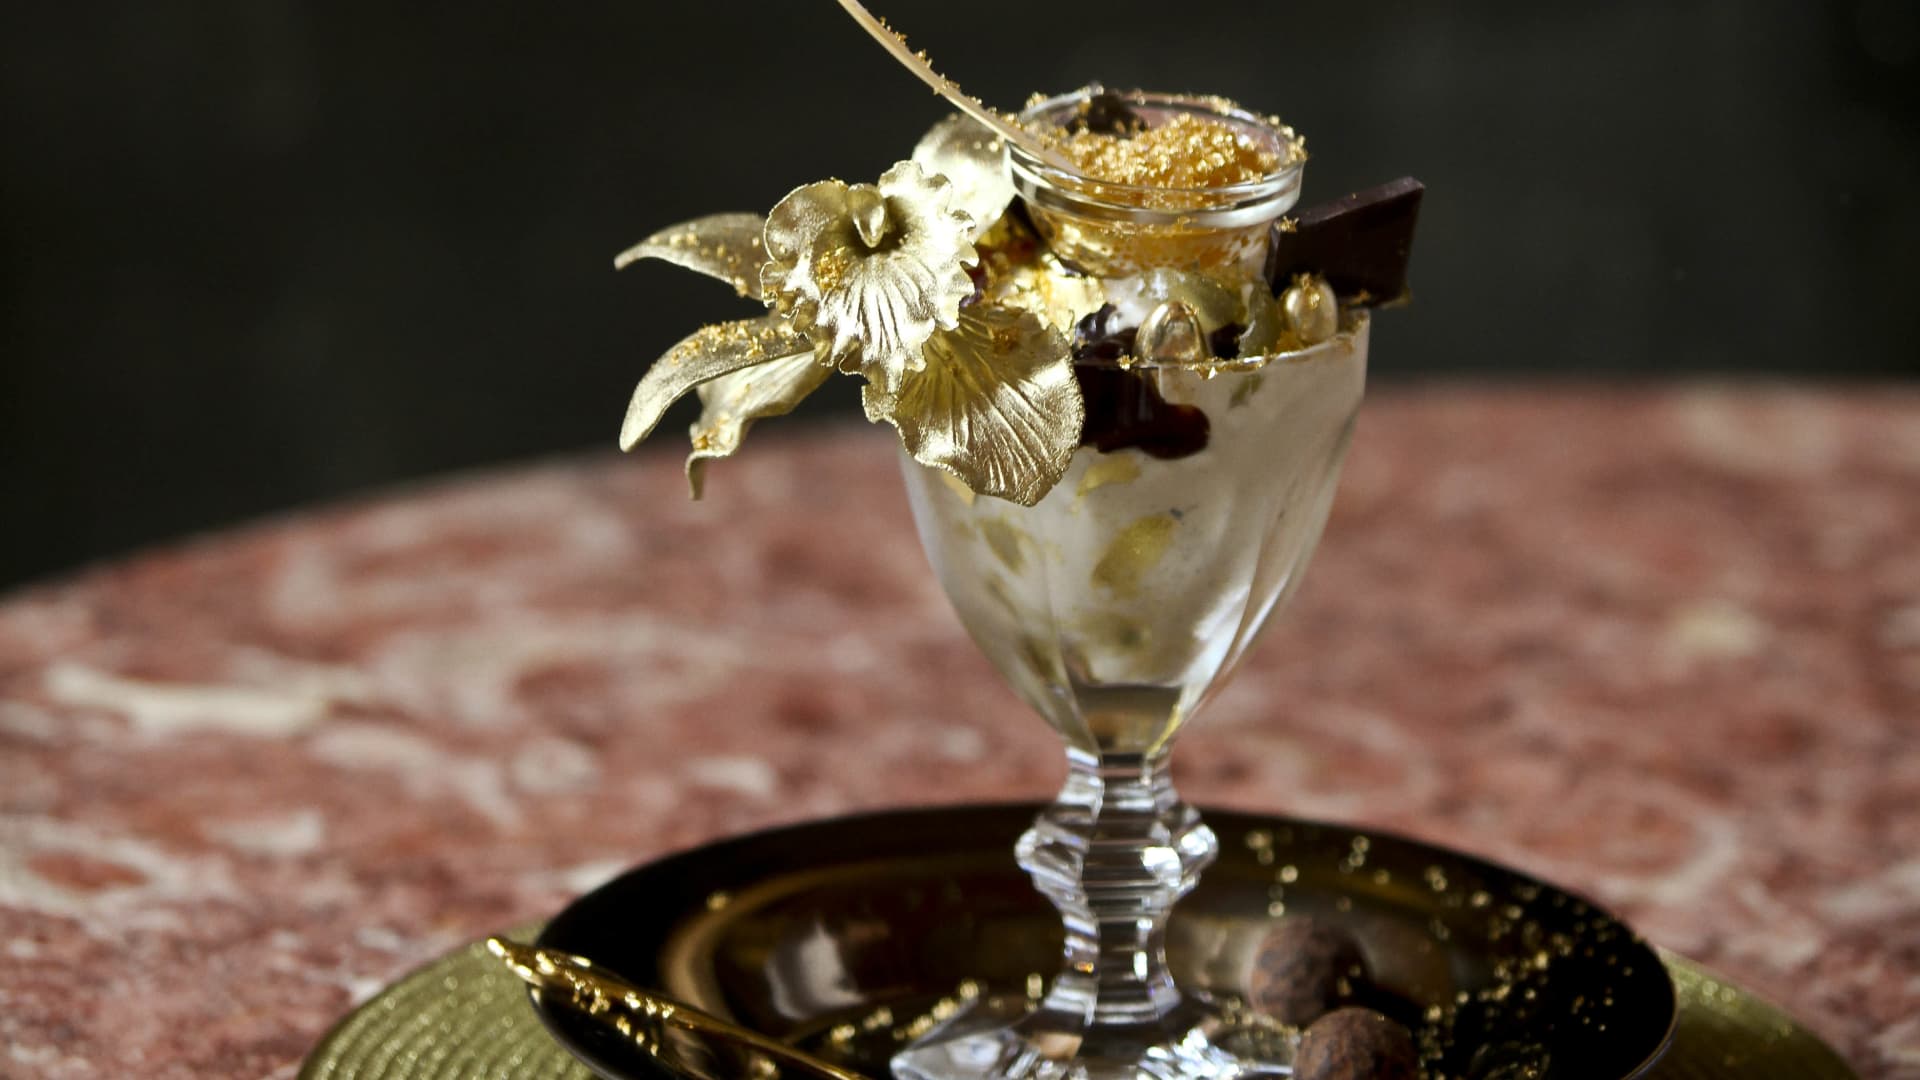 Heavenly taste? The obsession with edible gold